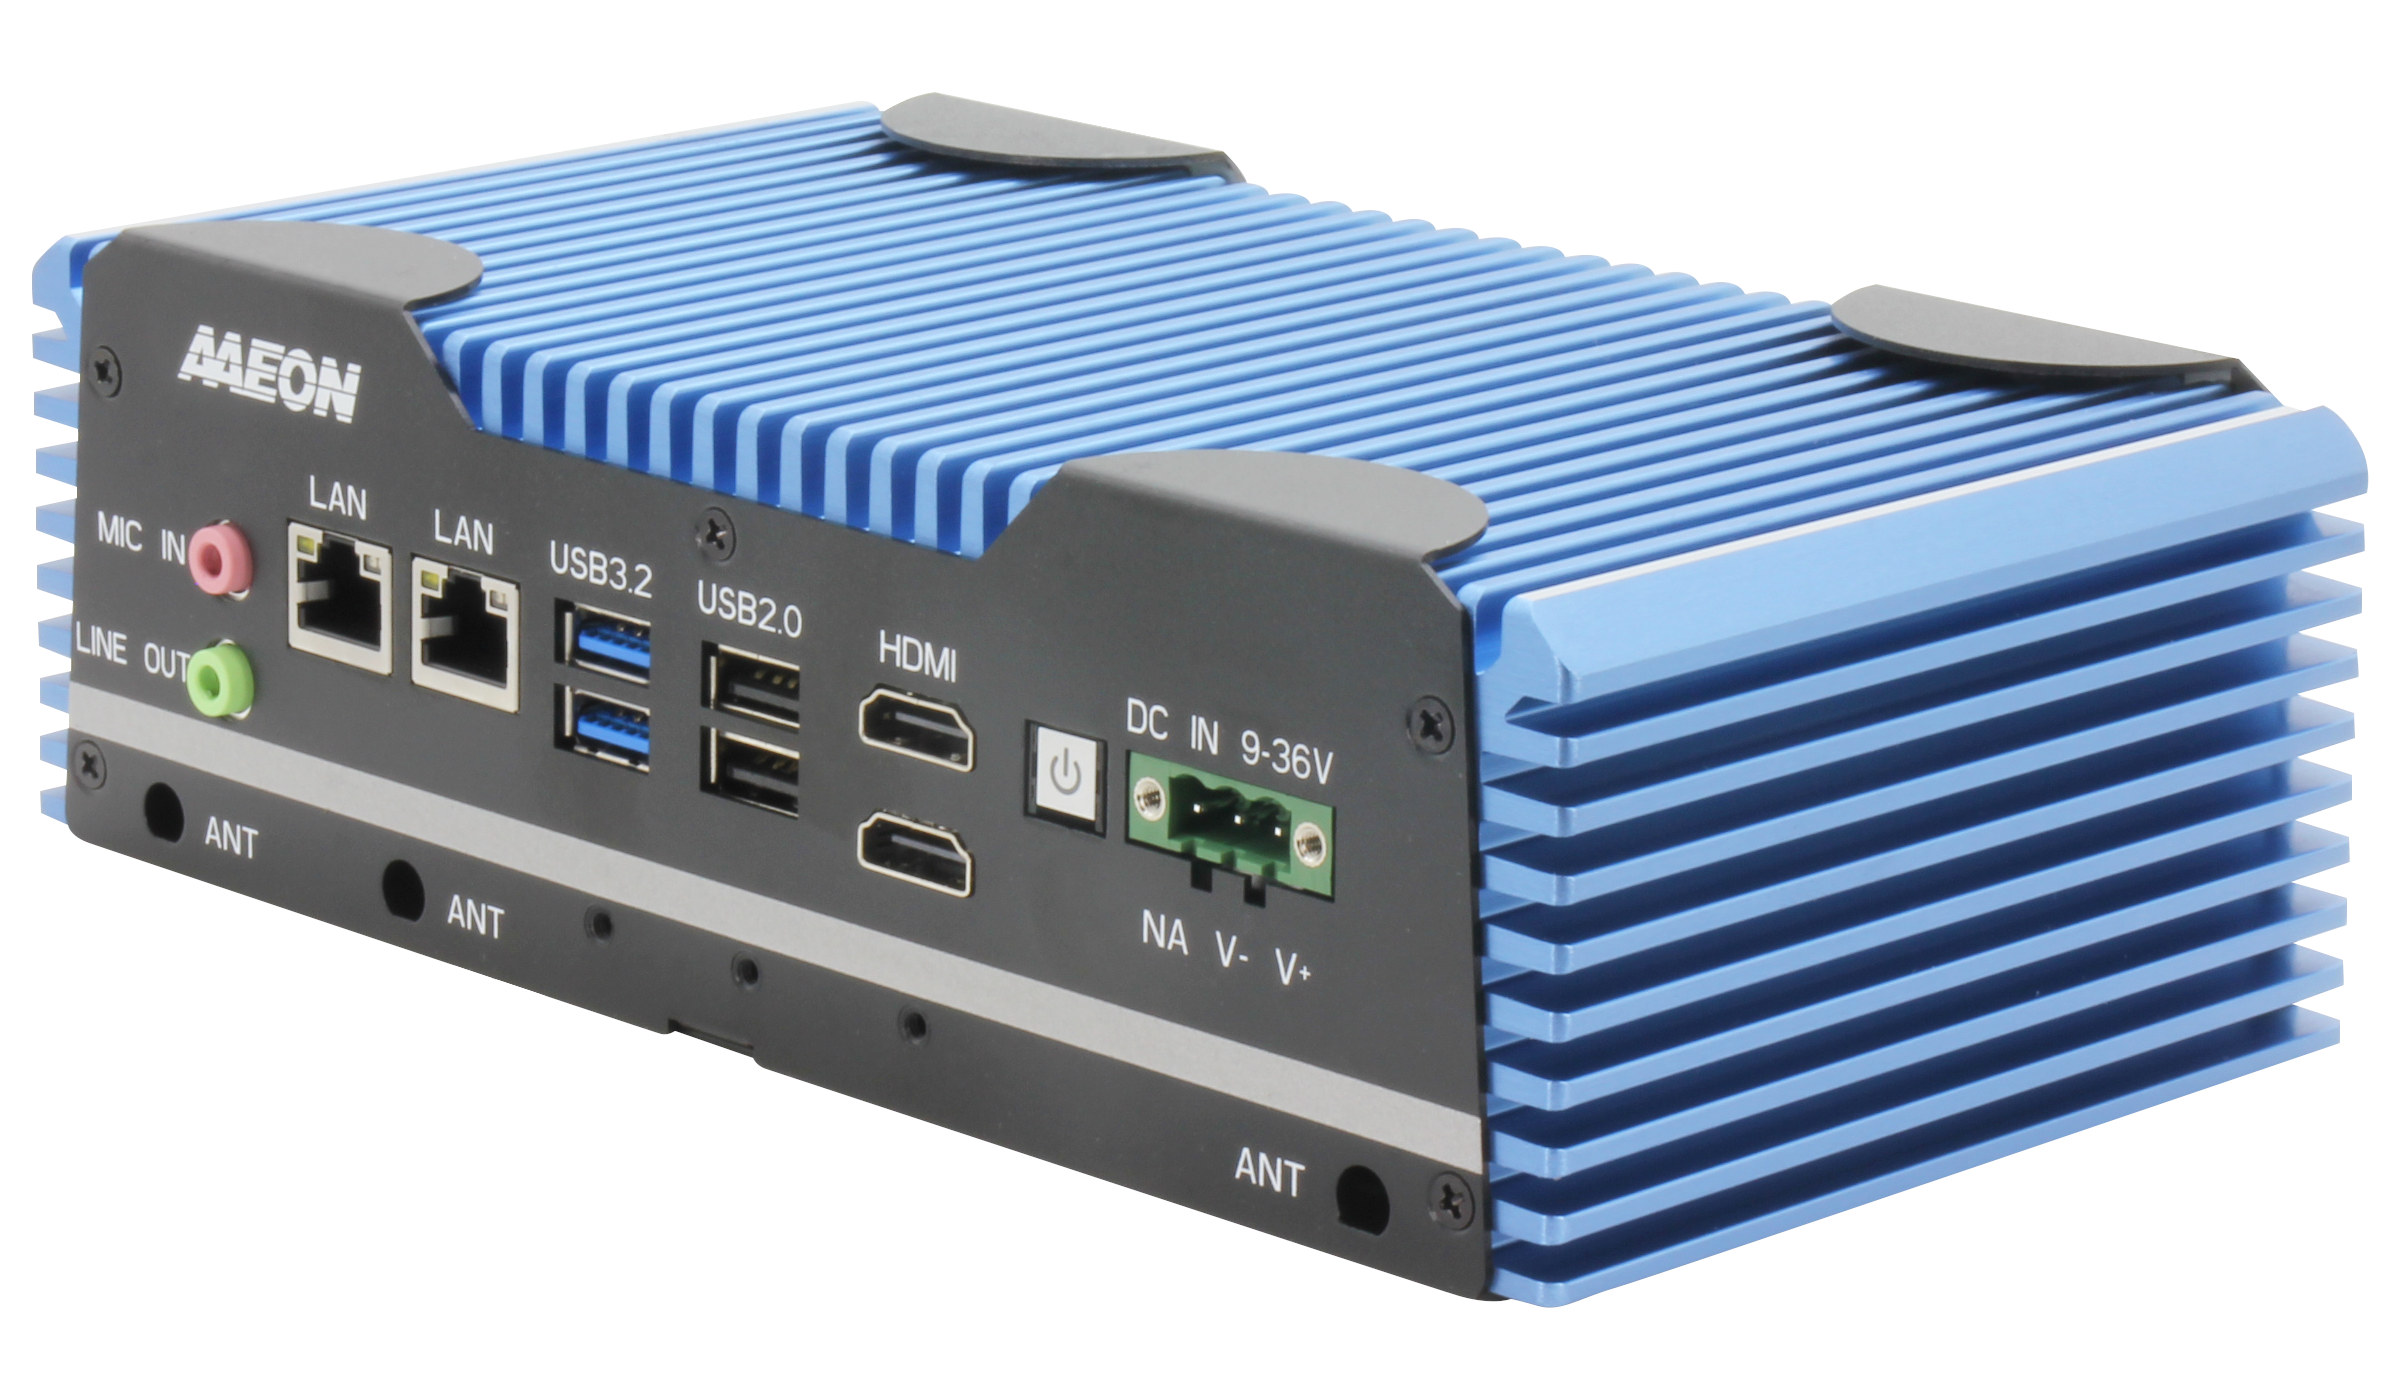 This fanless mini PC has two 2.5 GbE Ethernet ports an up to a